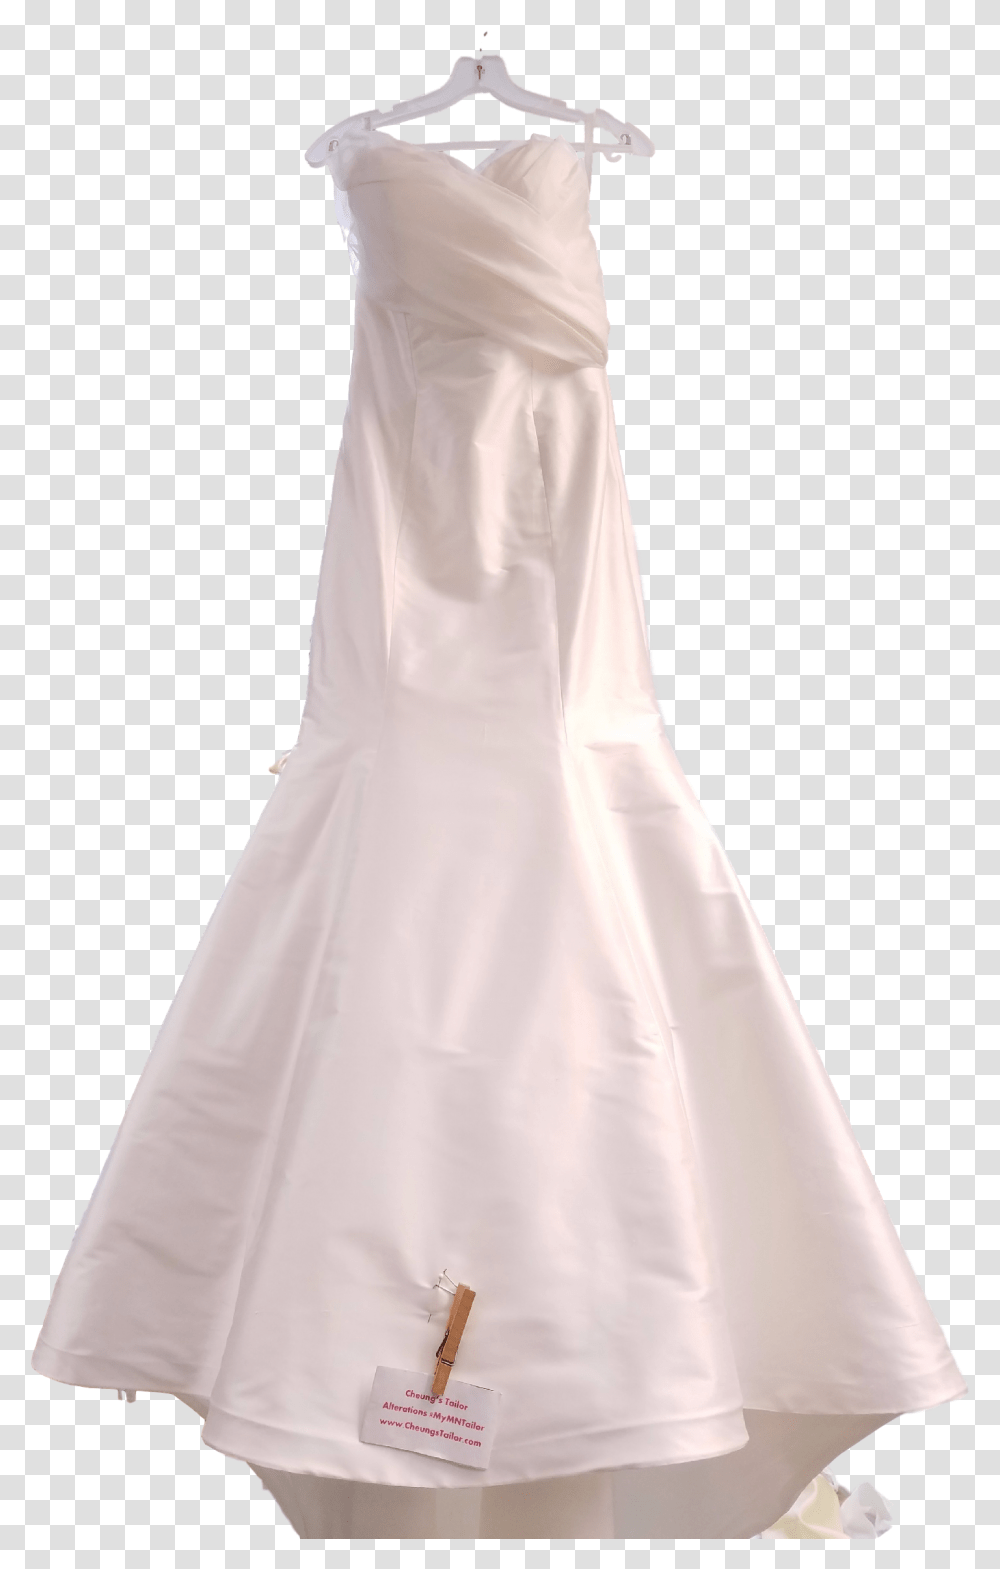 Professional Wedding Dress Pressing Amp Steaming Near Gown, Wedding Gown, Robe, Fashion Transparent Png